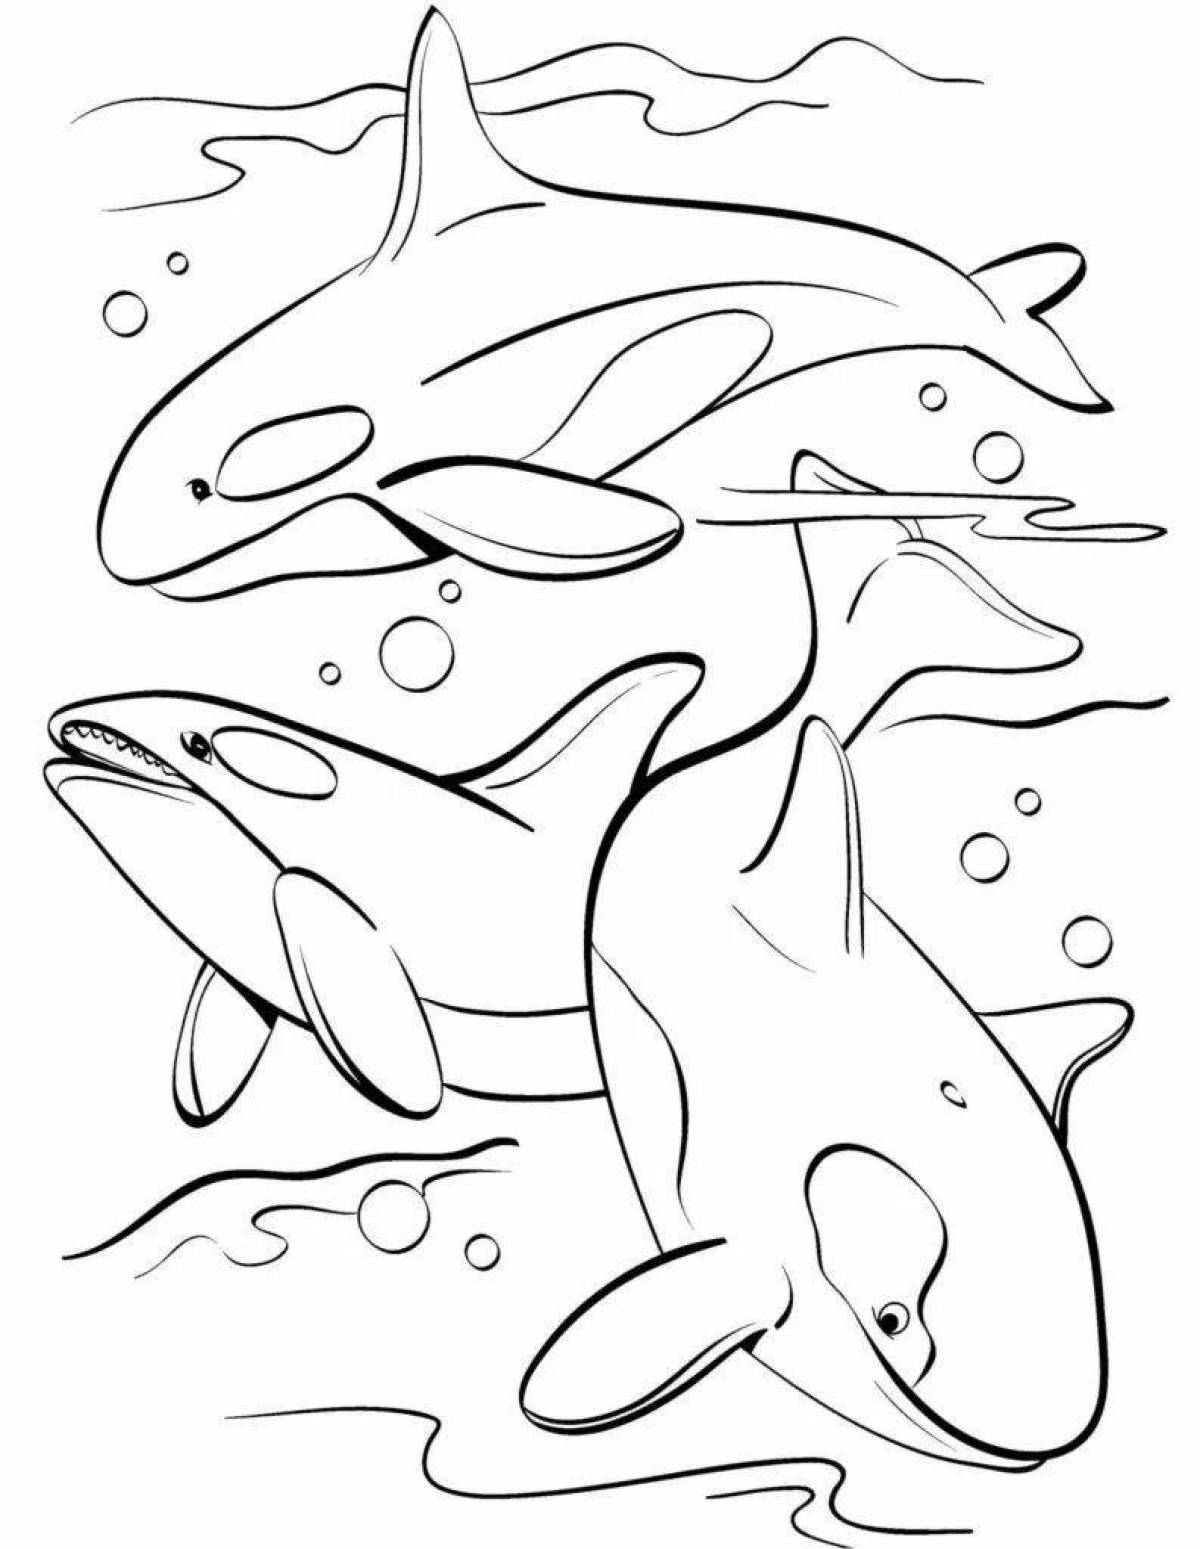 Coloring book shining dolphin